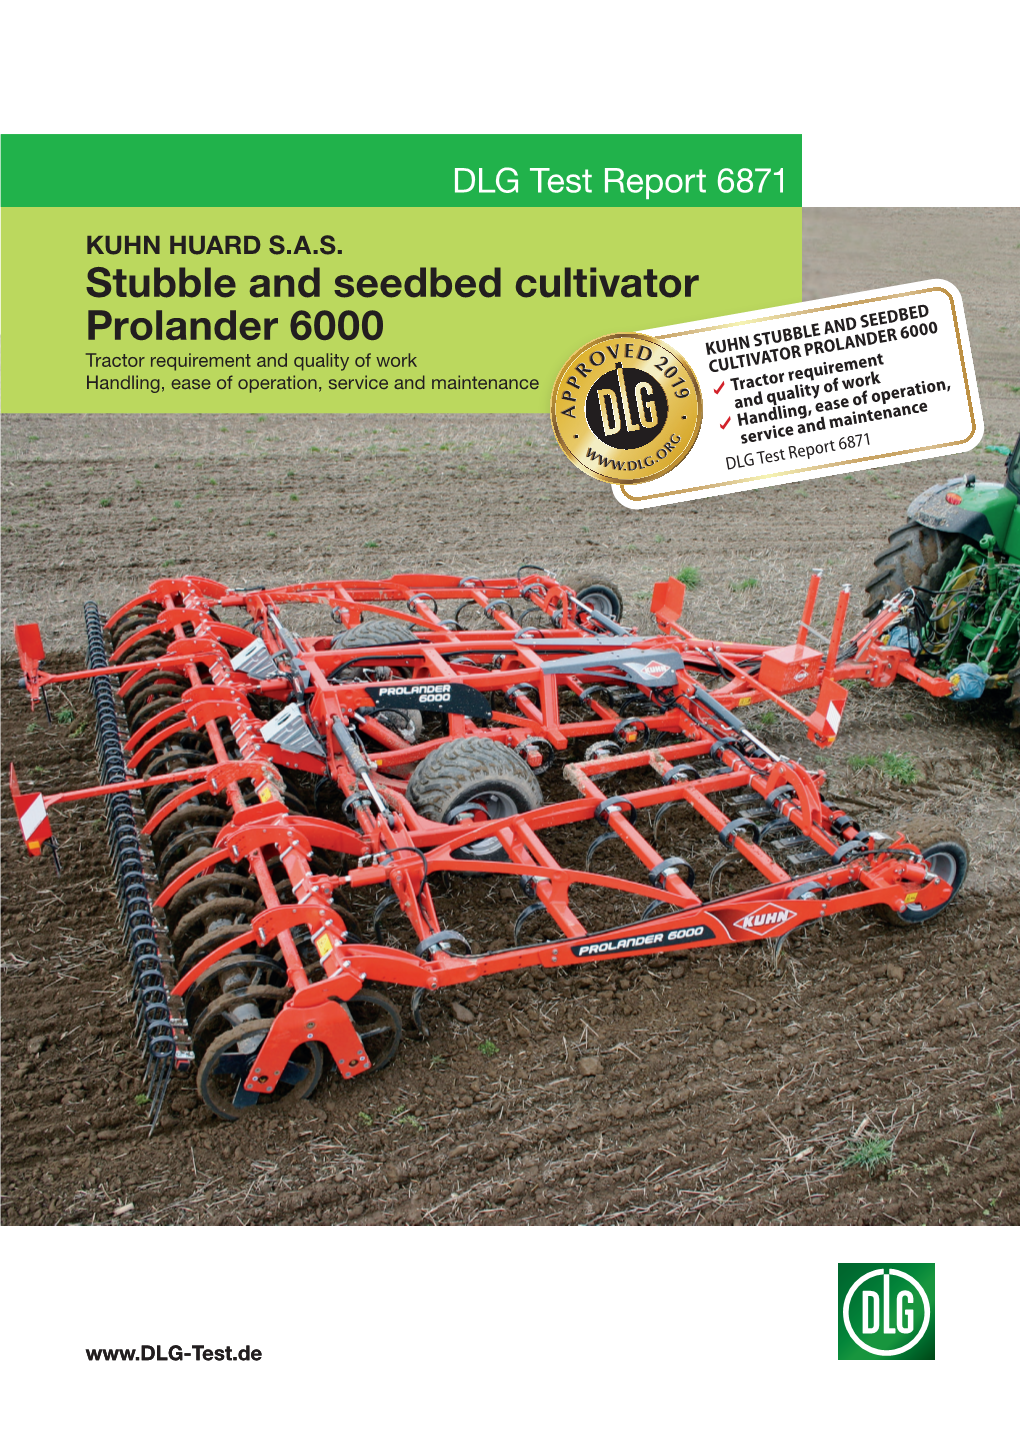 Stubble and Seedbed Cultivator Prolander 6000 Tractor Requirement and Quality of Work Handling, Ease of Operation, Service and Maintenance